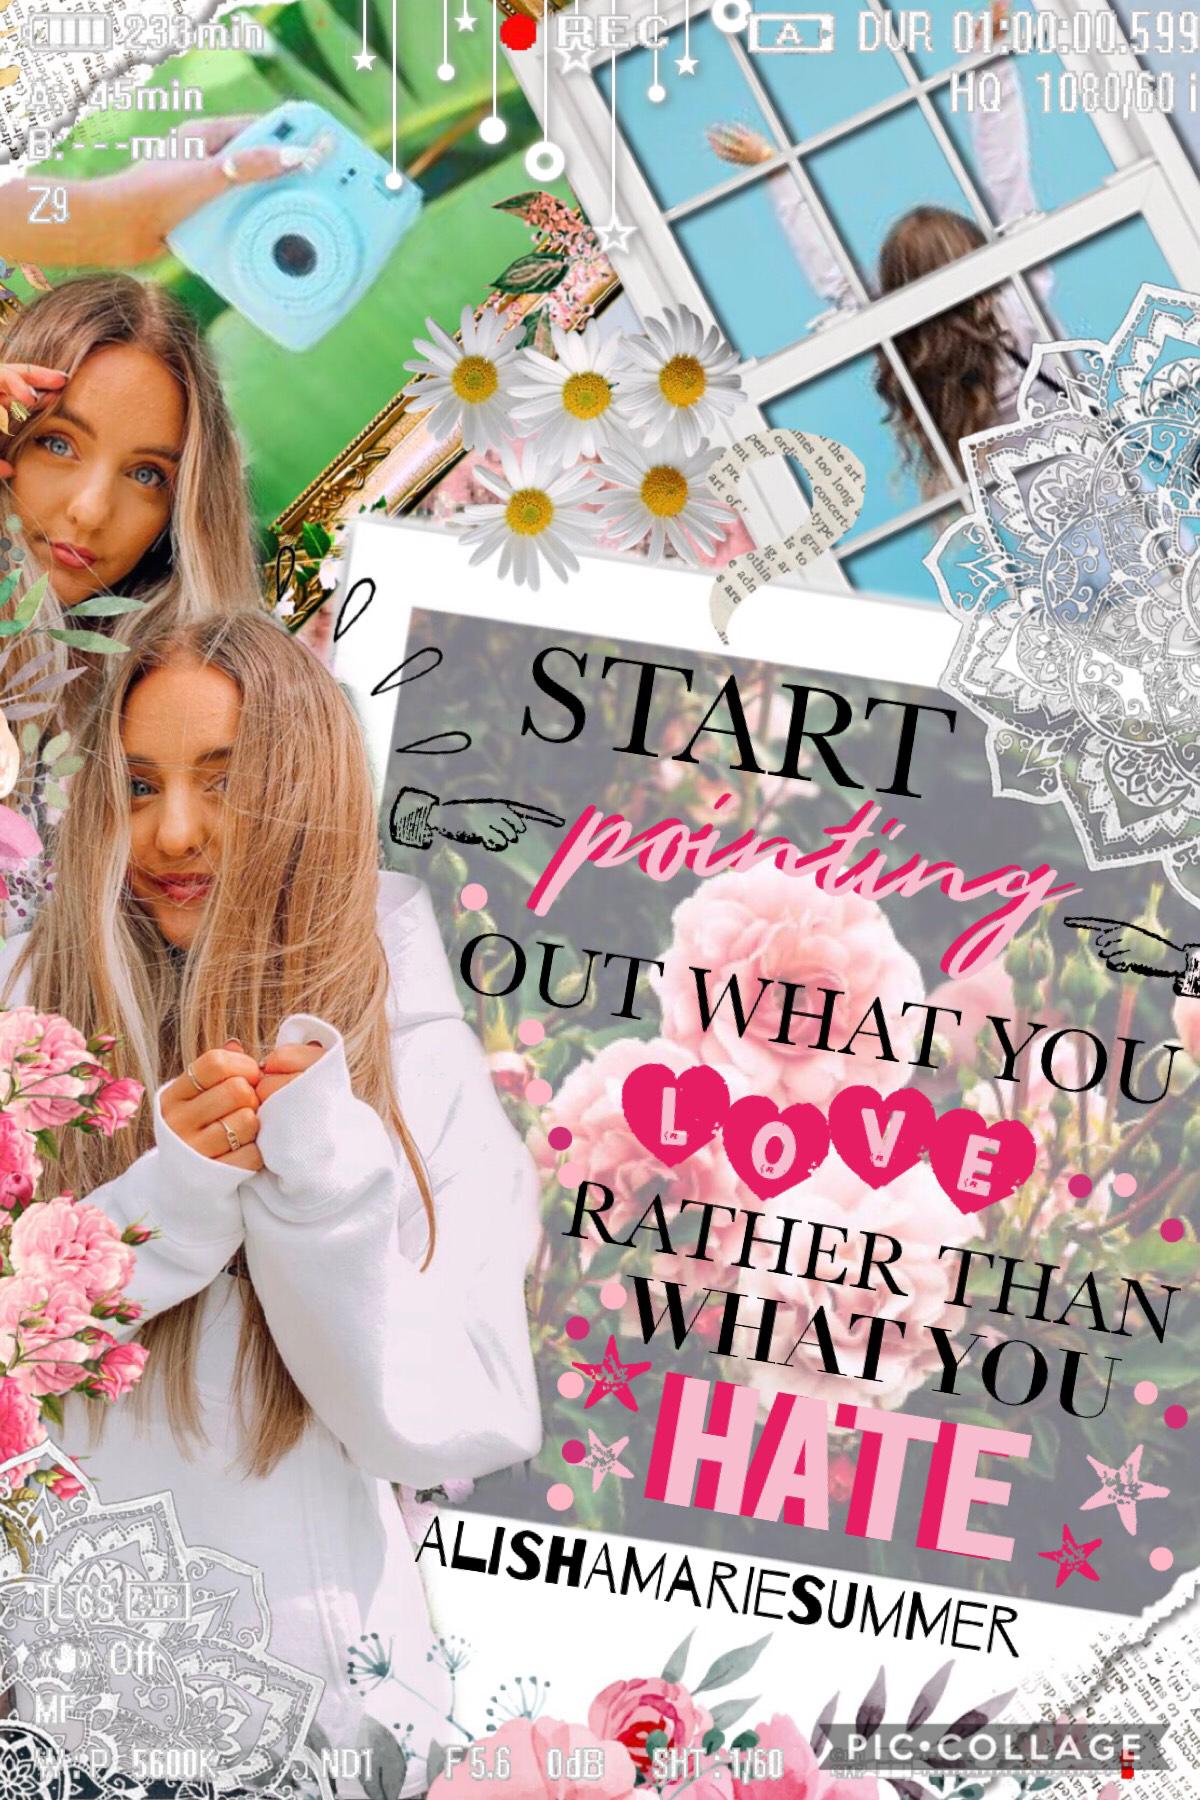 🌺TaP🌺

hey guys! hope you like this lovely Sarah Betts edit!! definitely go and check her out!! 👉🏻

QOTD: Sarah Betts or Laurdiy

AOTD: Sarah Betts 